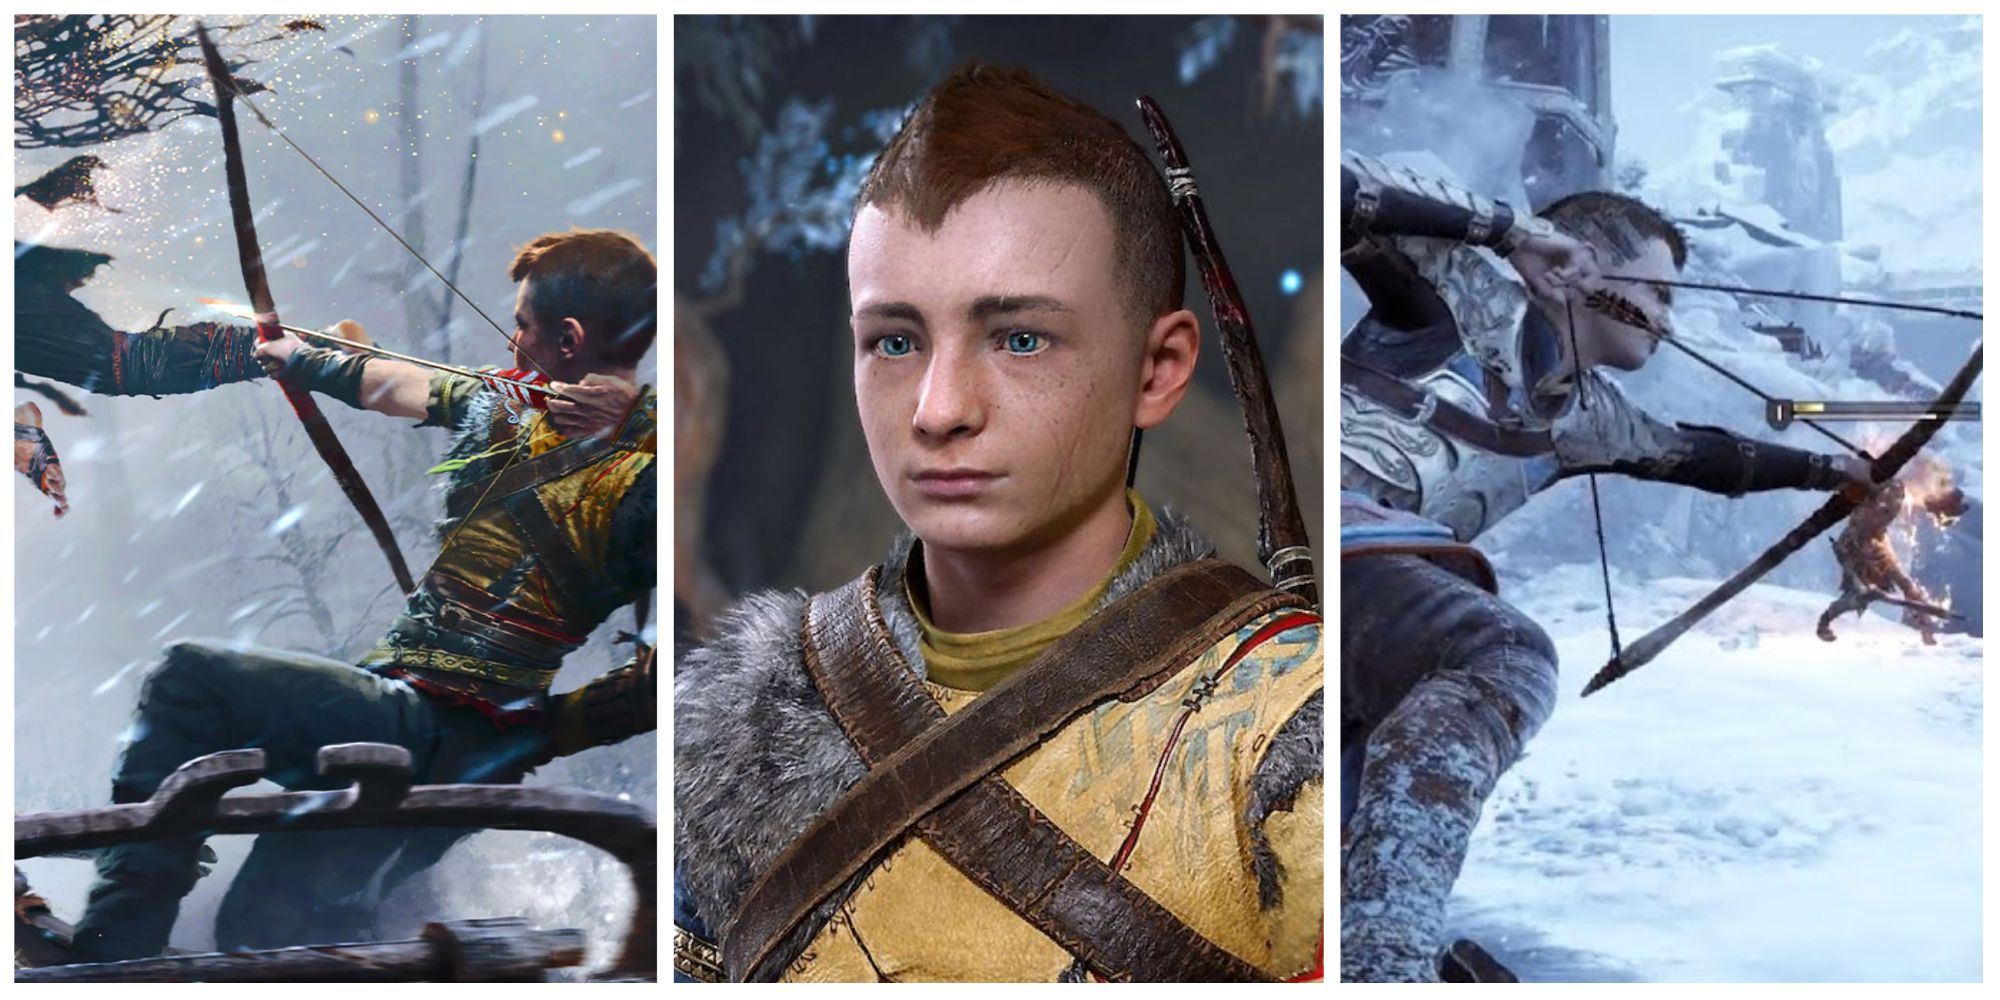 In the words of Atreus: Three legendary weapons do you have a